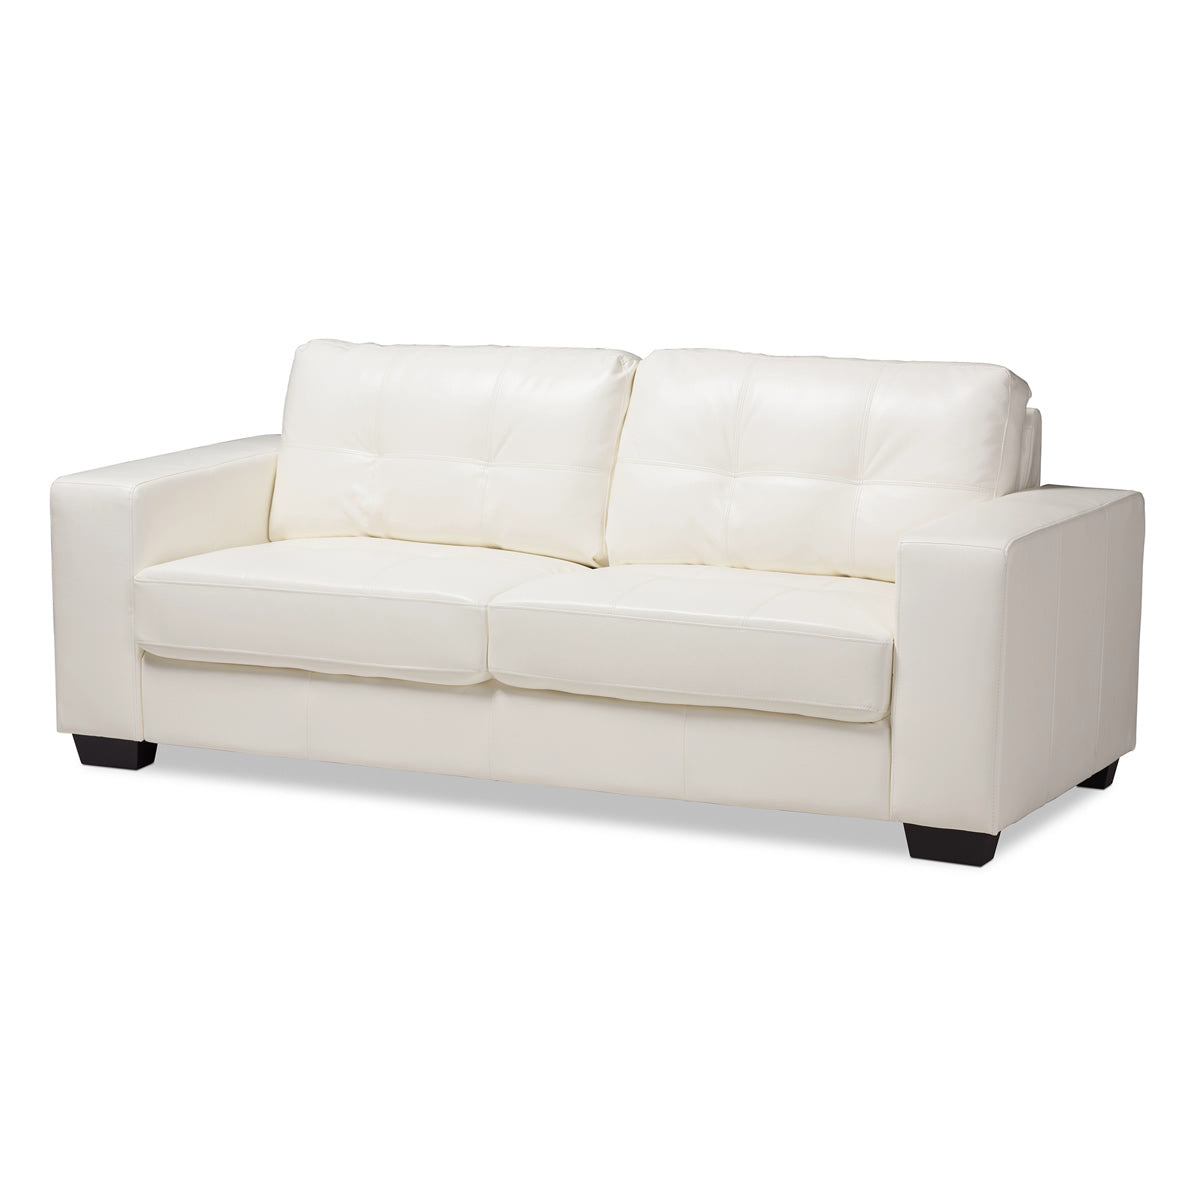 Baxton Studio Adalynn Modern and Contemporary White Faux Leather Upholstered Sofa Baxton Studio-sofas-Minimal And Modern - 1